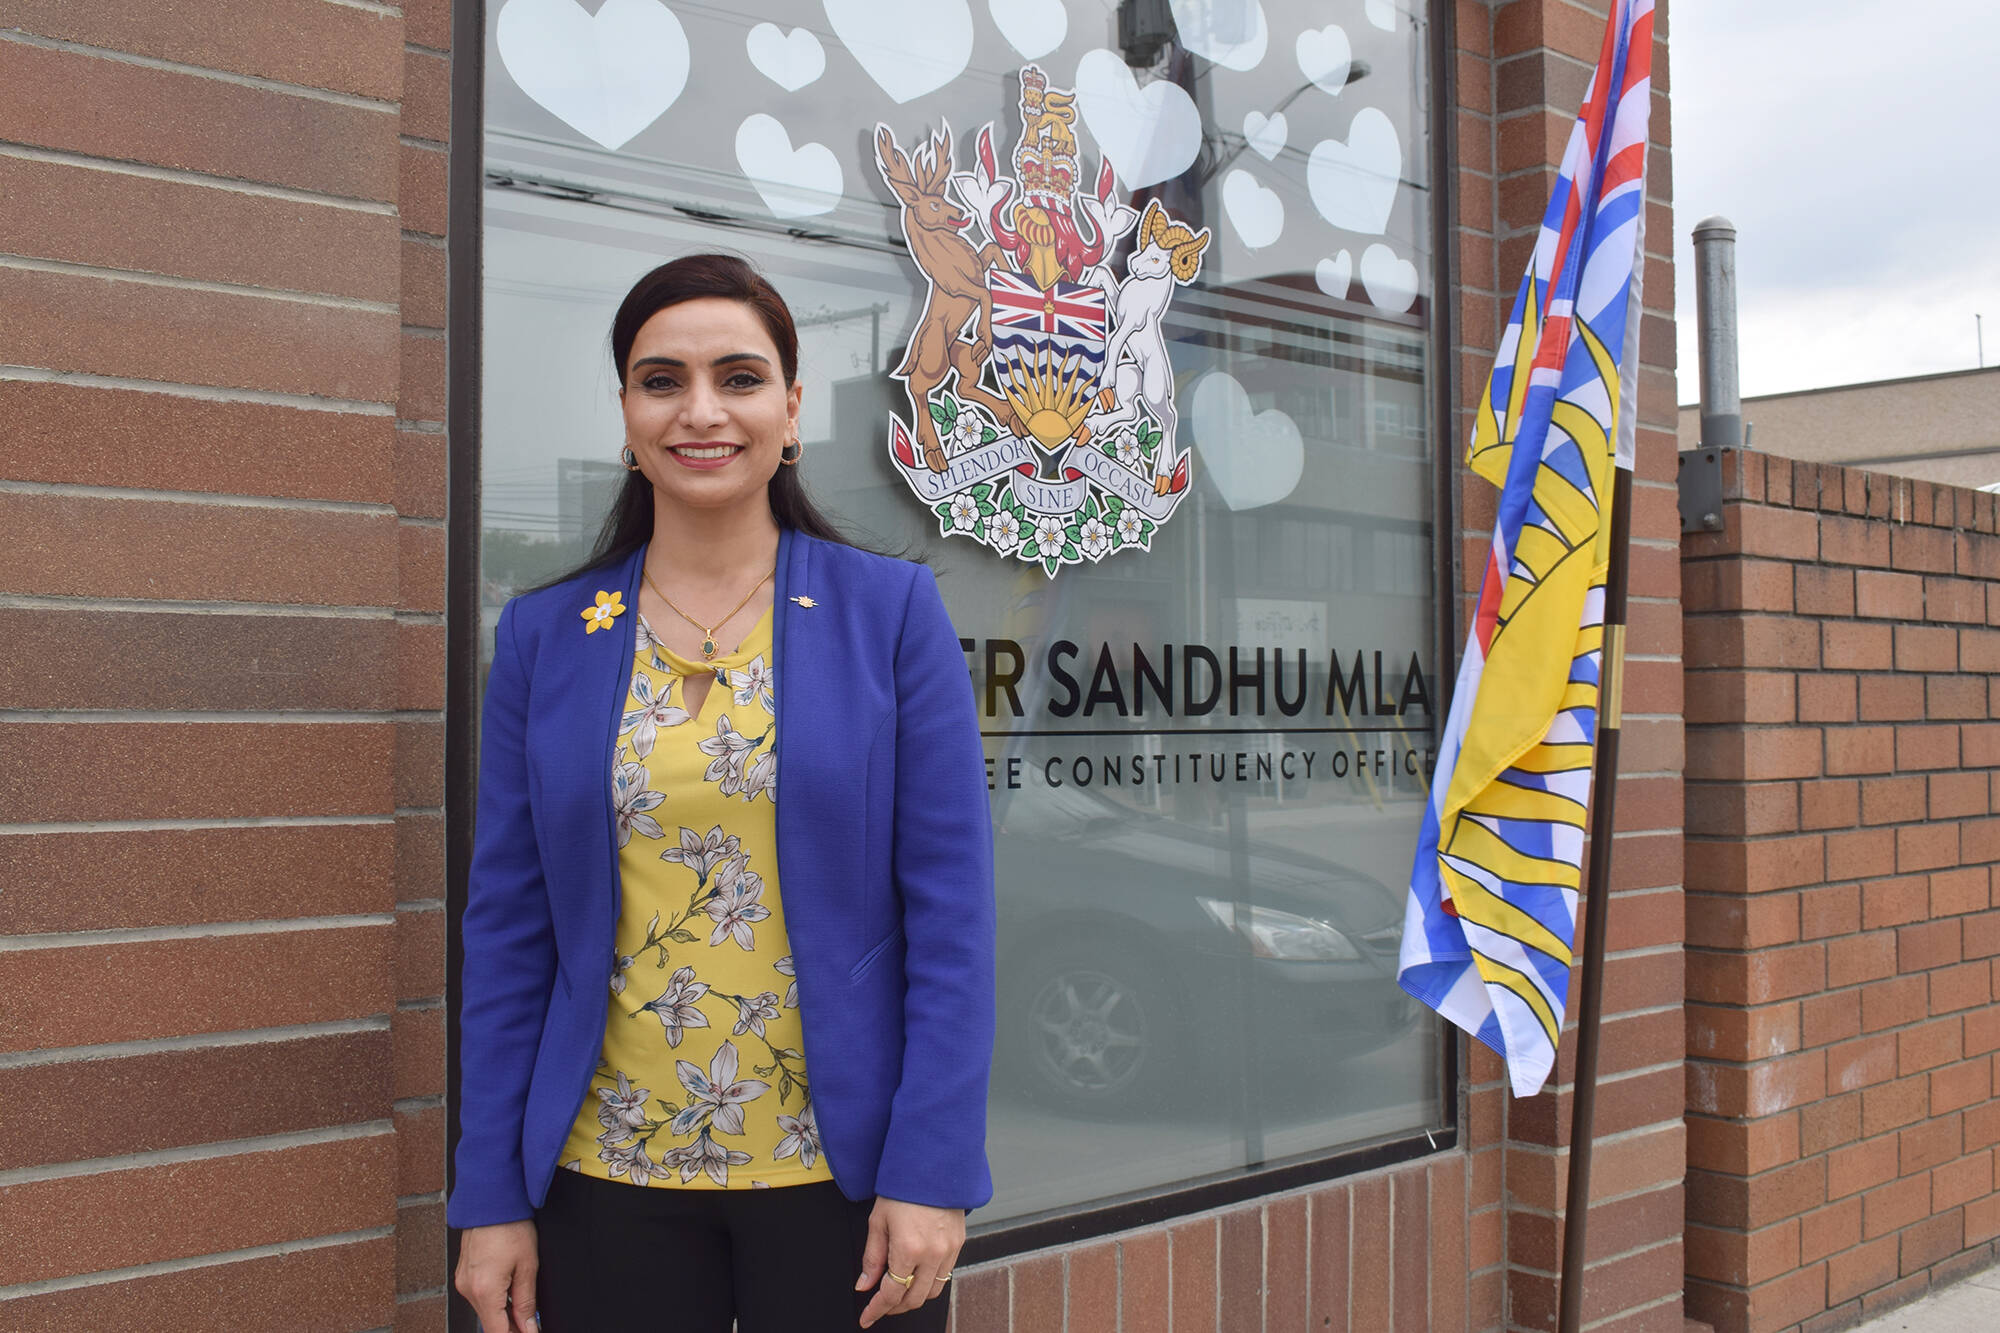 Vernon-Monashee MLA Harwinder Sandhu is the subject of a recall petition in her riding, launched by a constituent. (Morning Star- file photo)